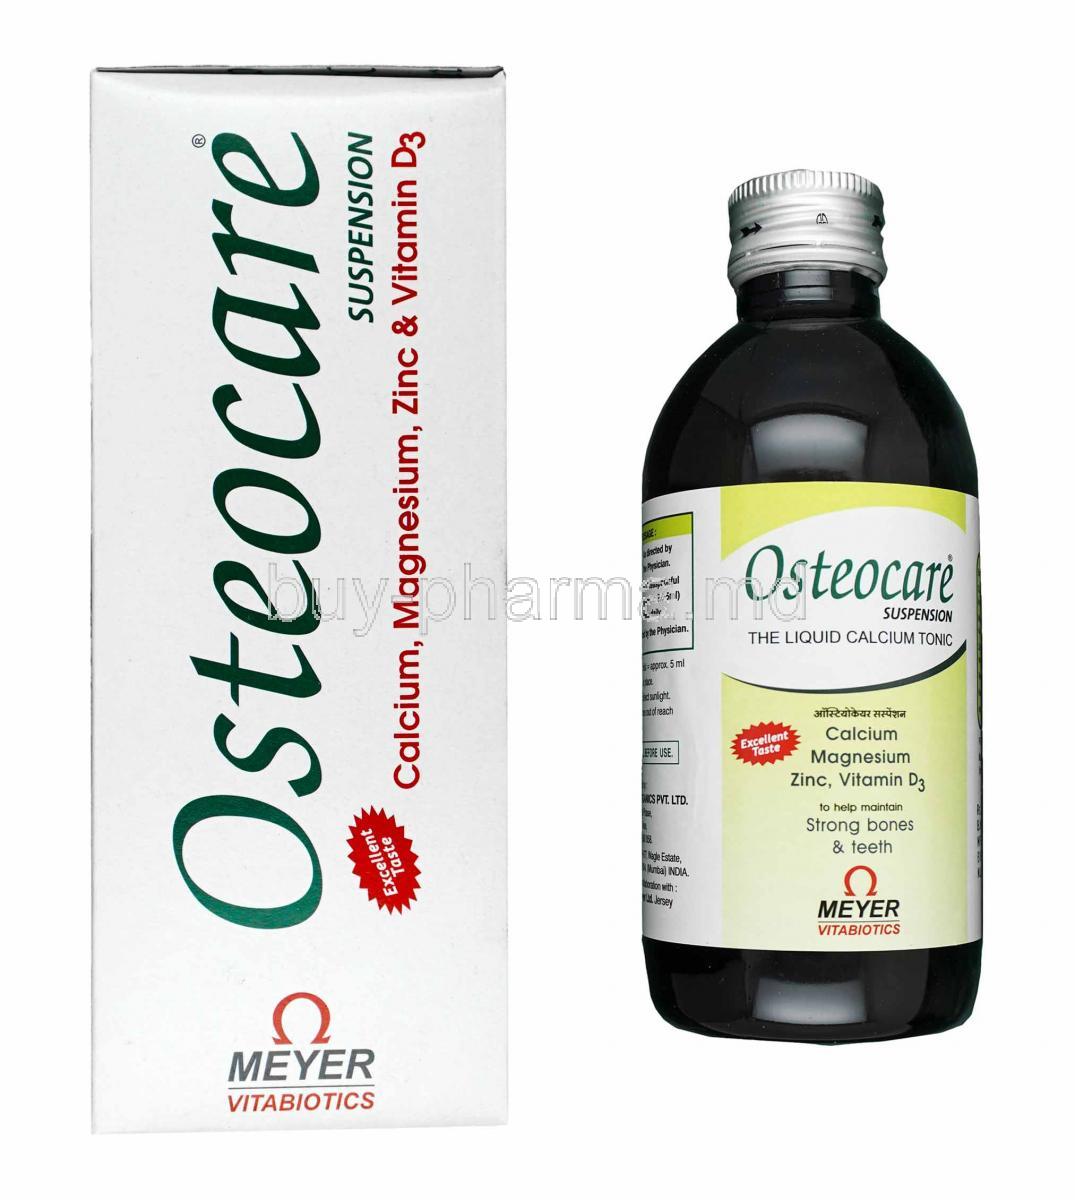 Osteocare Suspension box and bottle